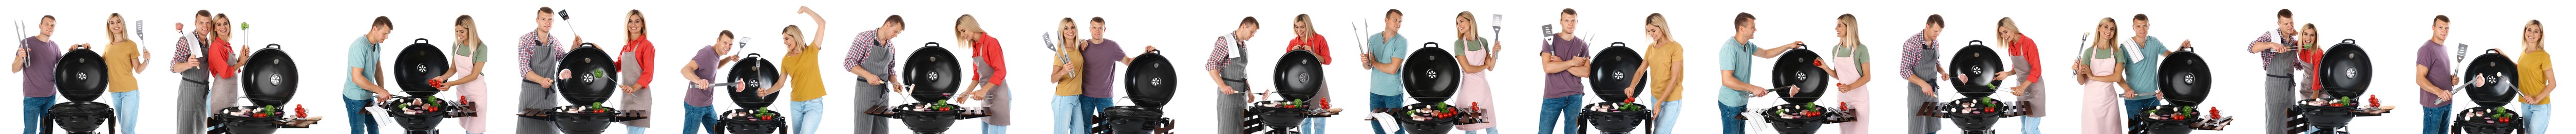 Collage with photos of man and woman cooking on barbecue grill against white background. Banner design